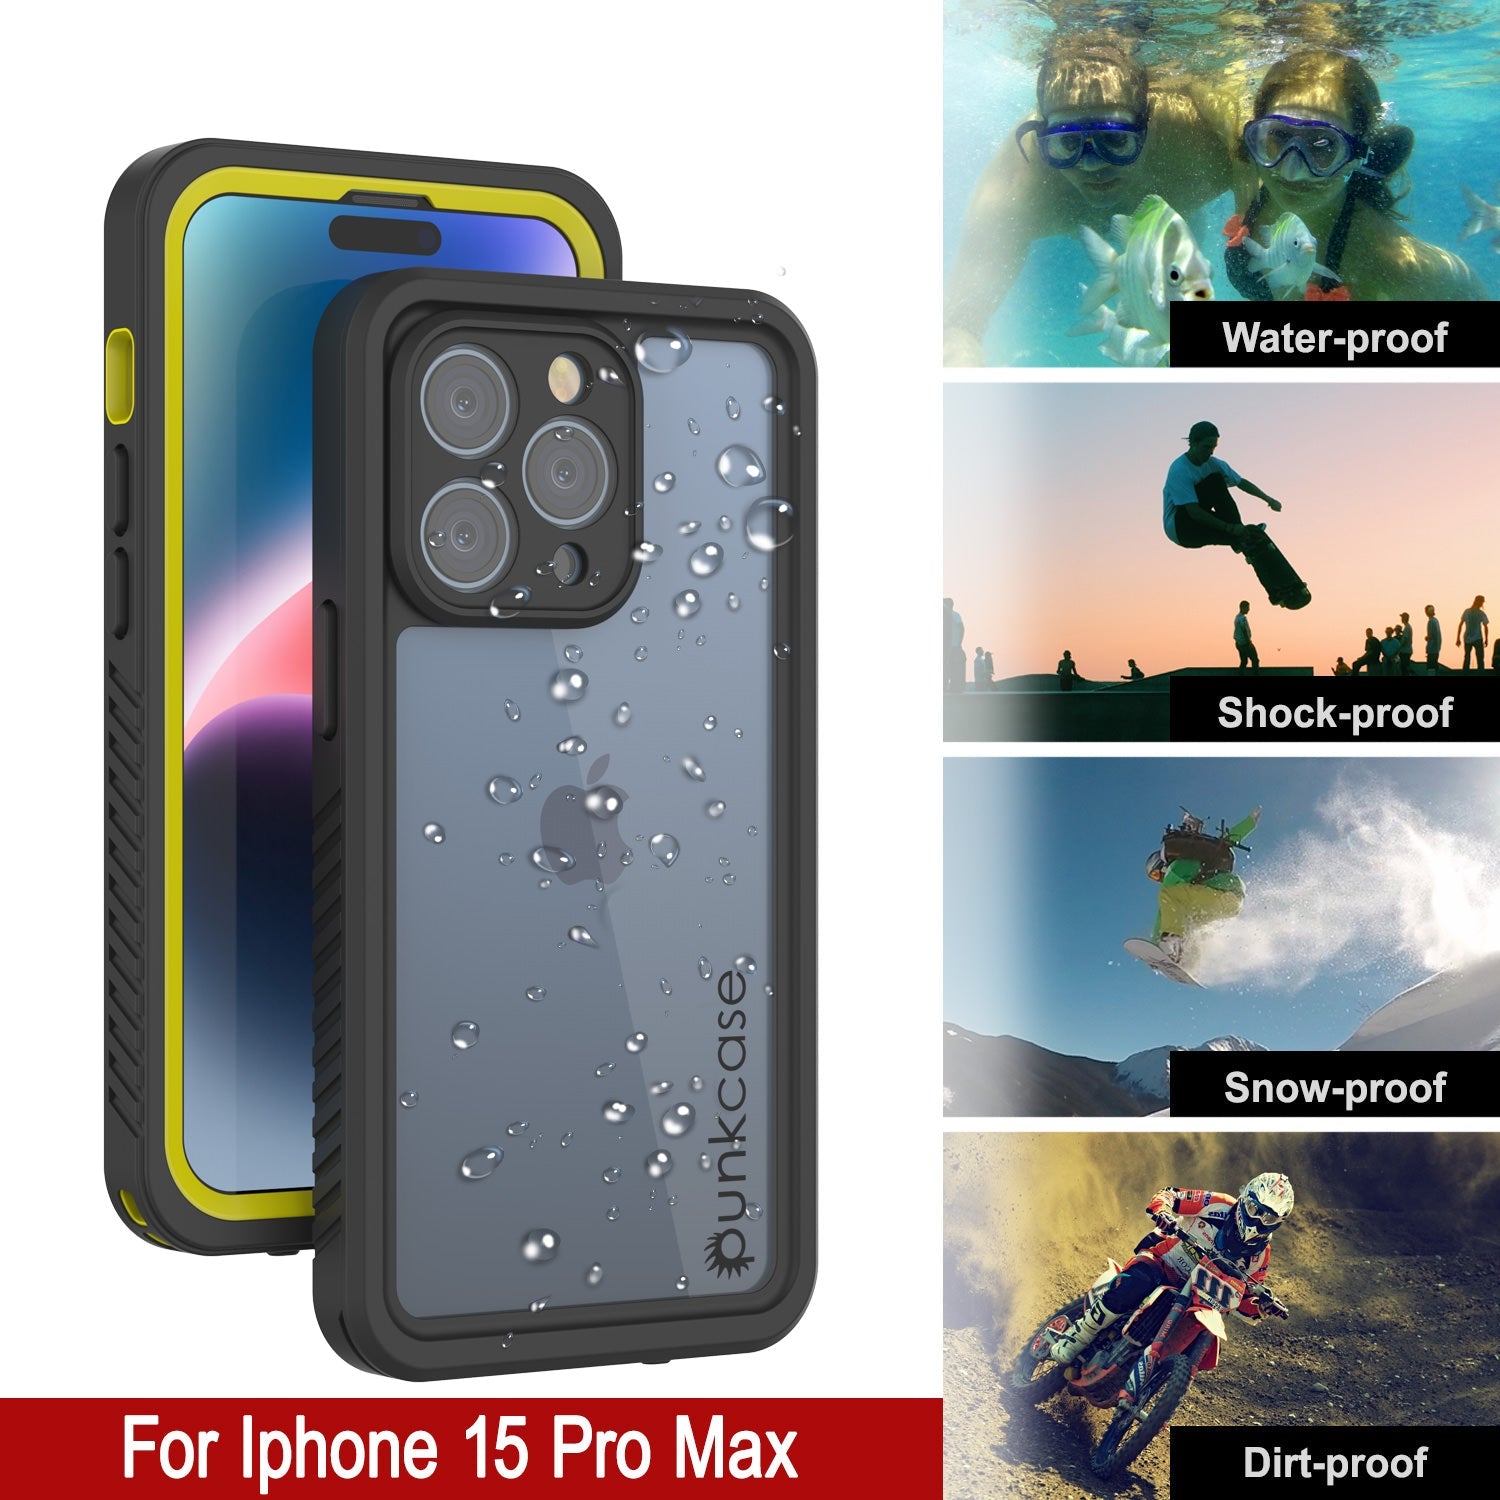 iPhone 15 Pro Max Waterproof Case, Punkcase [Extreme Series] Armor Cover W/ Built In Screen Protector [Yellow]